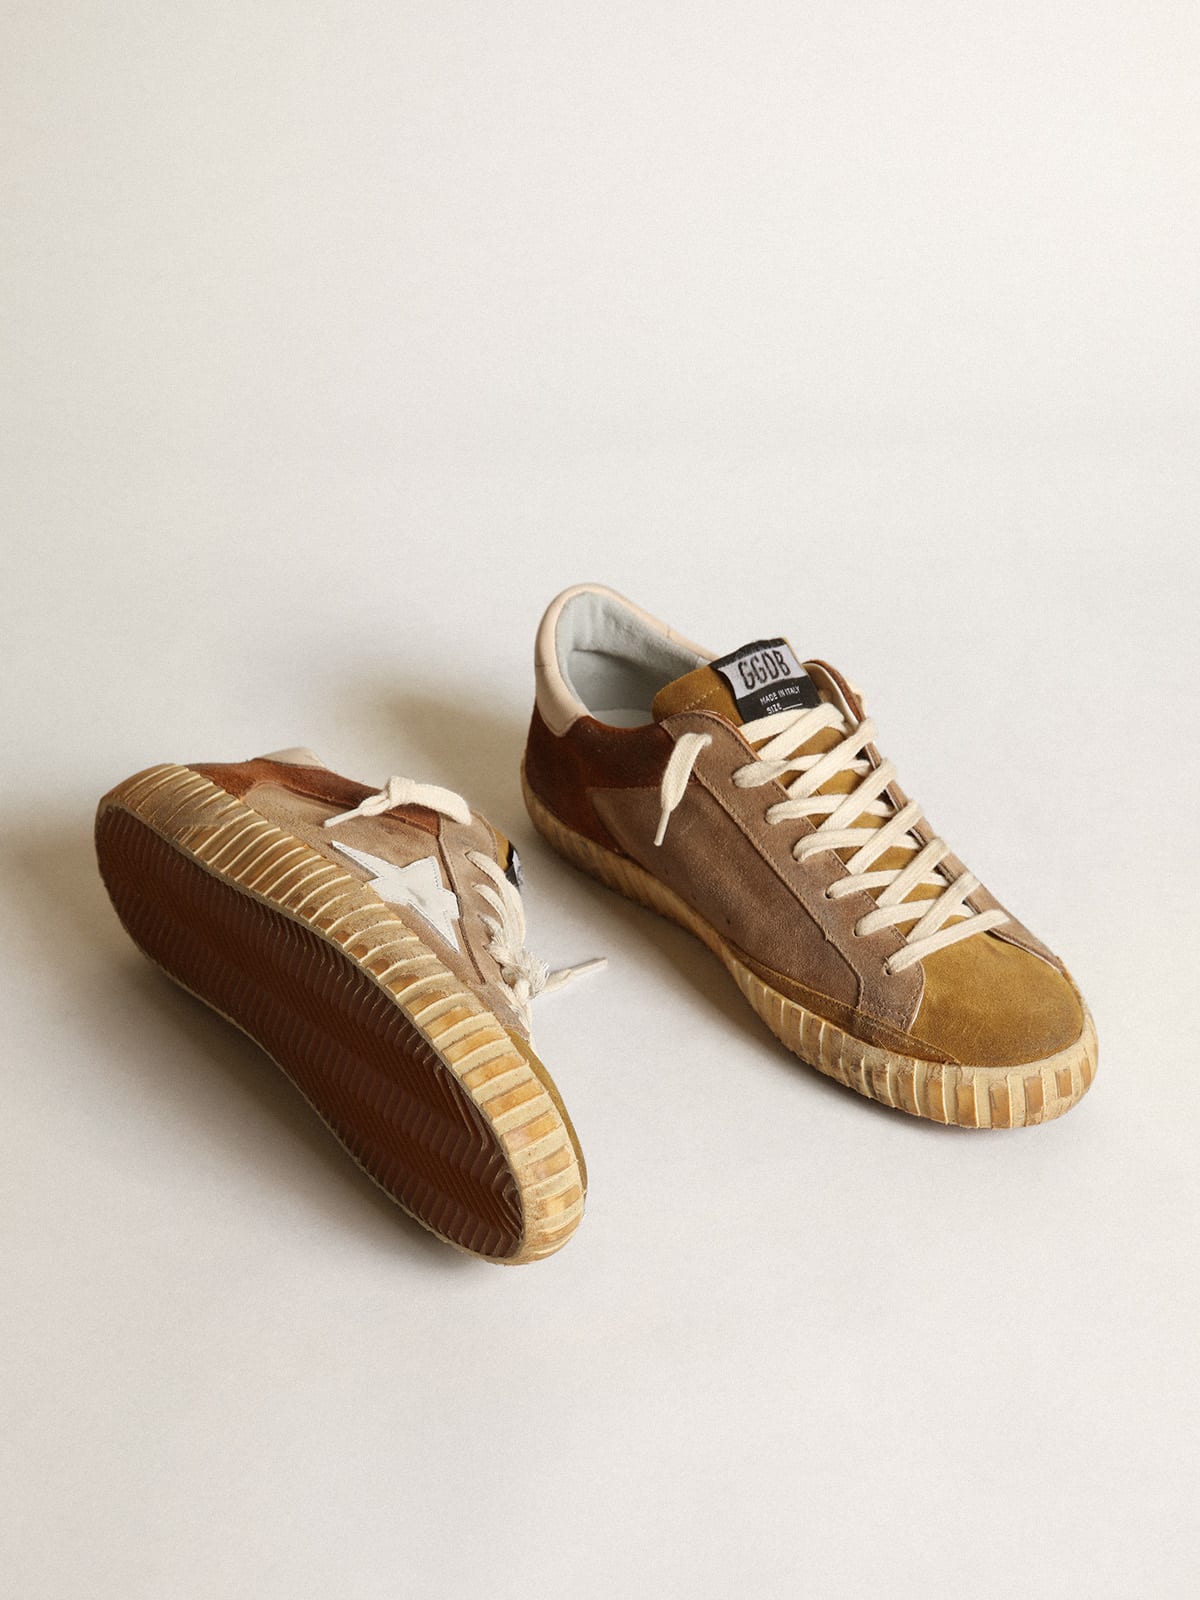 Golden Goose - Men’s Super-Star sneakers in tobacco and brown suede with white leather star in 